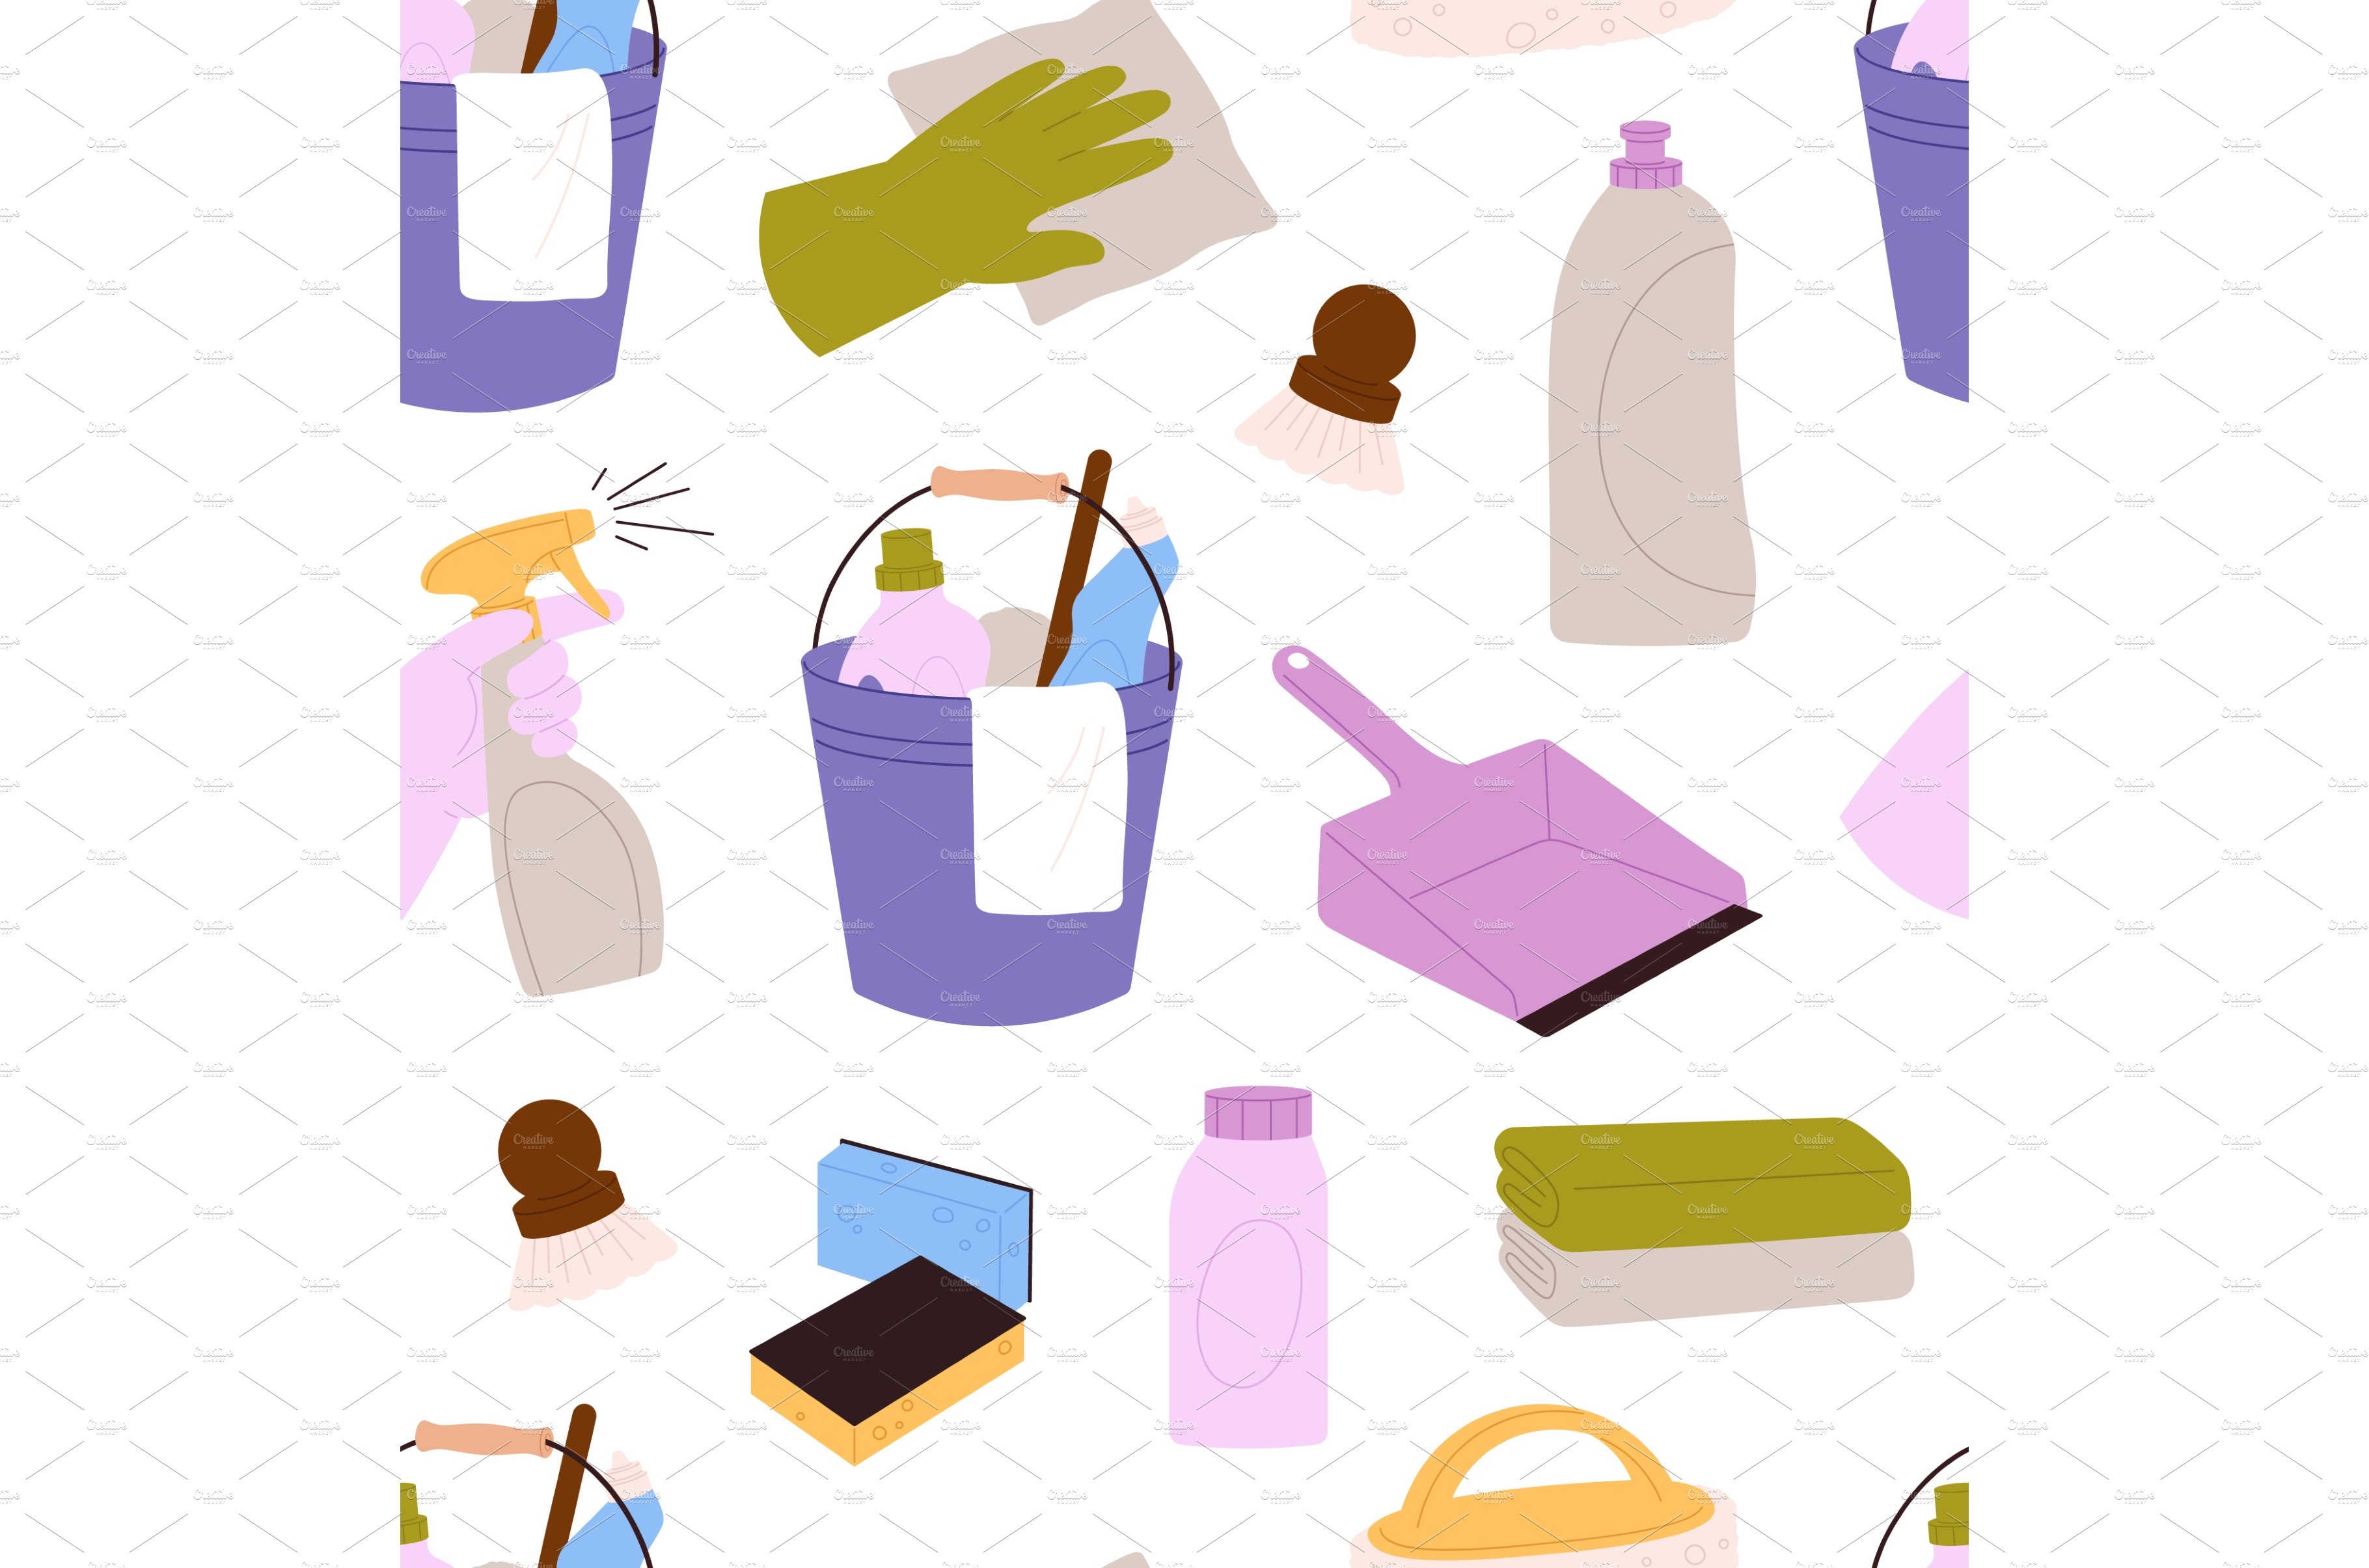 Cleaning housework elements seamless cover image.